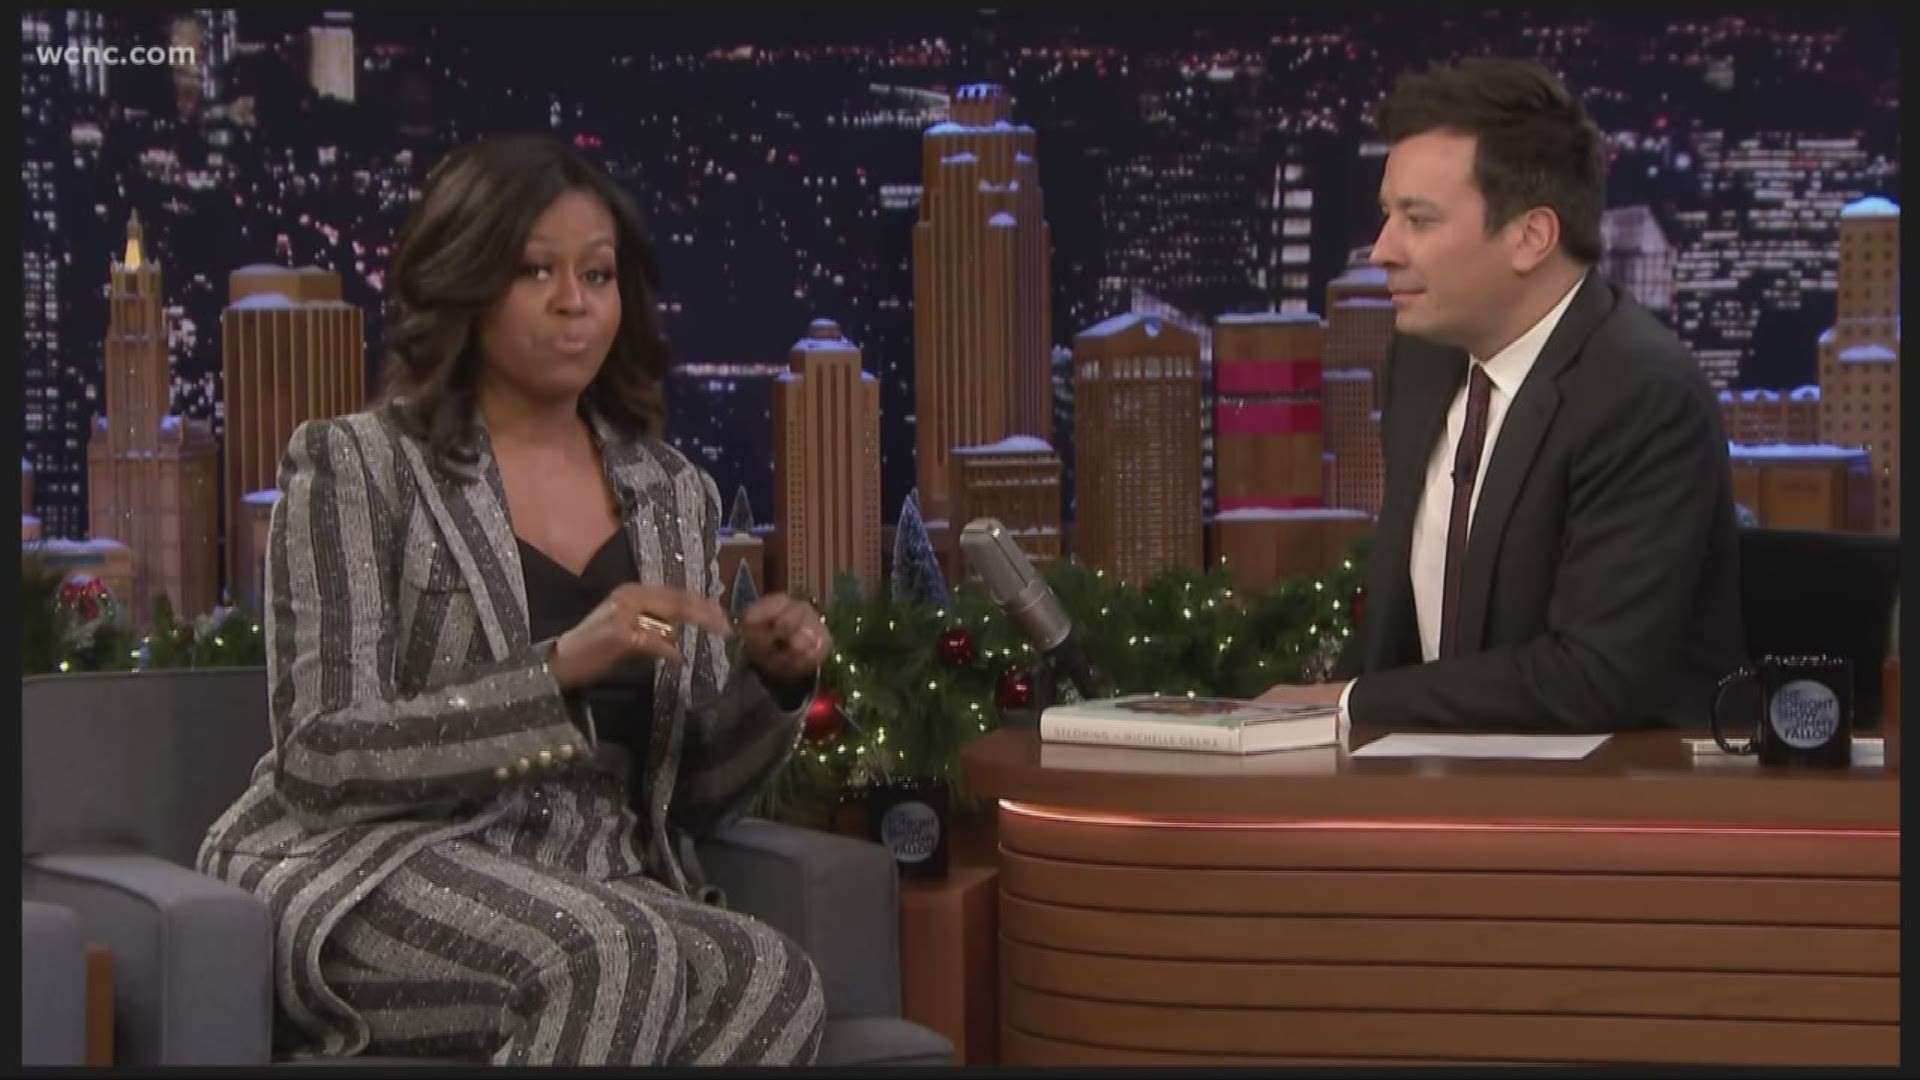 Michelle Obama stopped by The Tonight Show with Jimmy Fallon to promote her new book. But it's when the former first lady got real that has everyone talking.